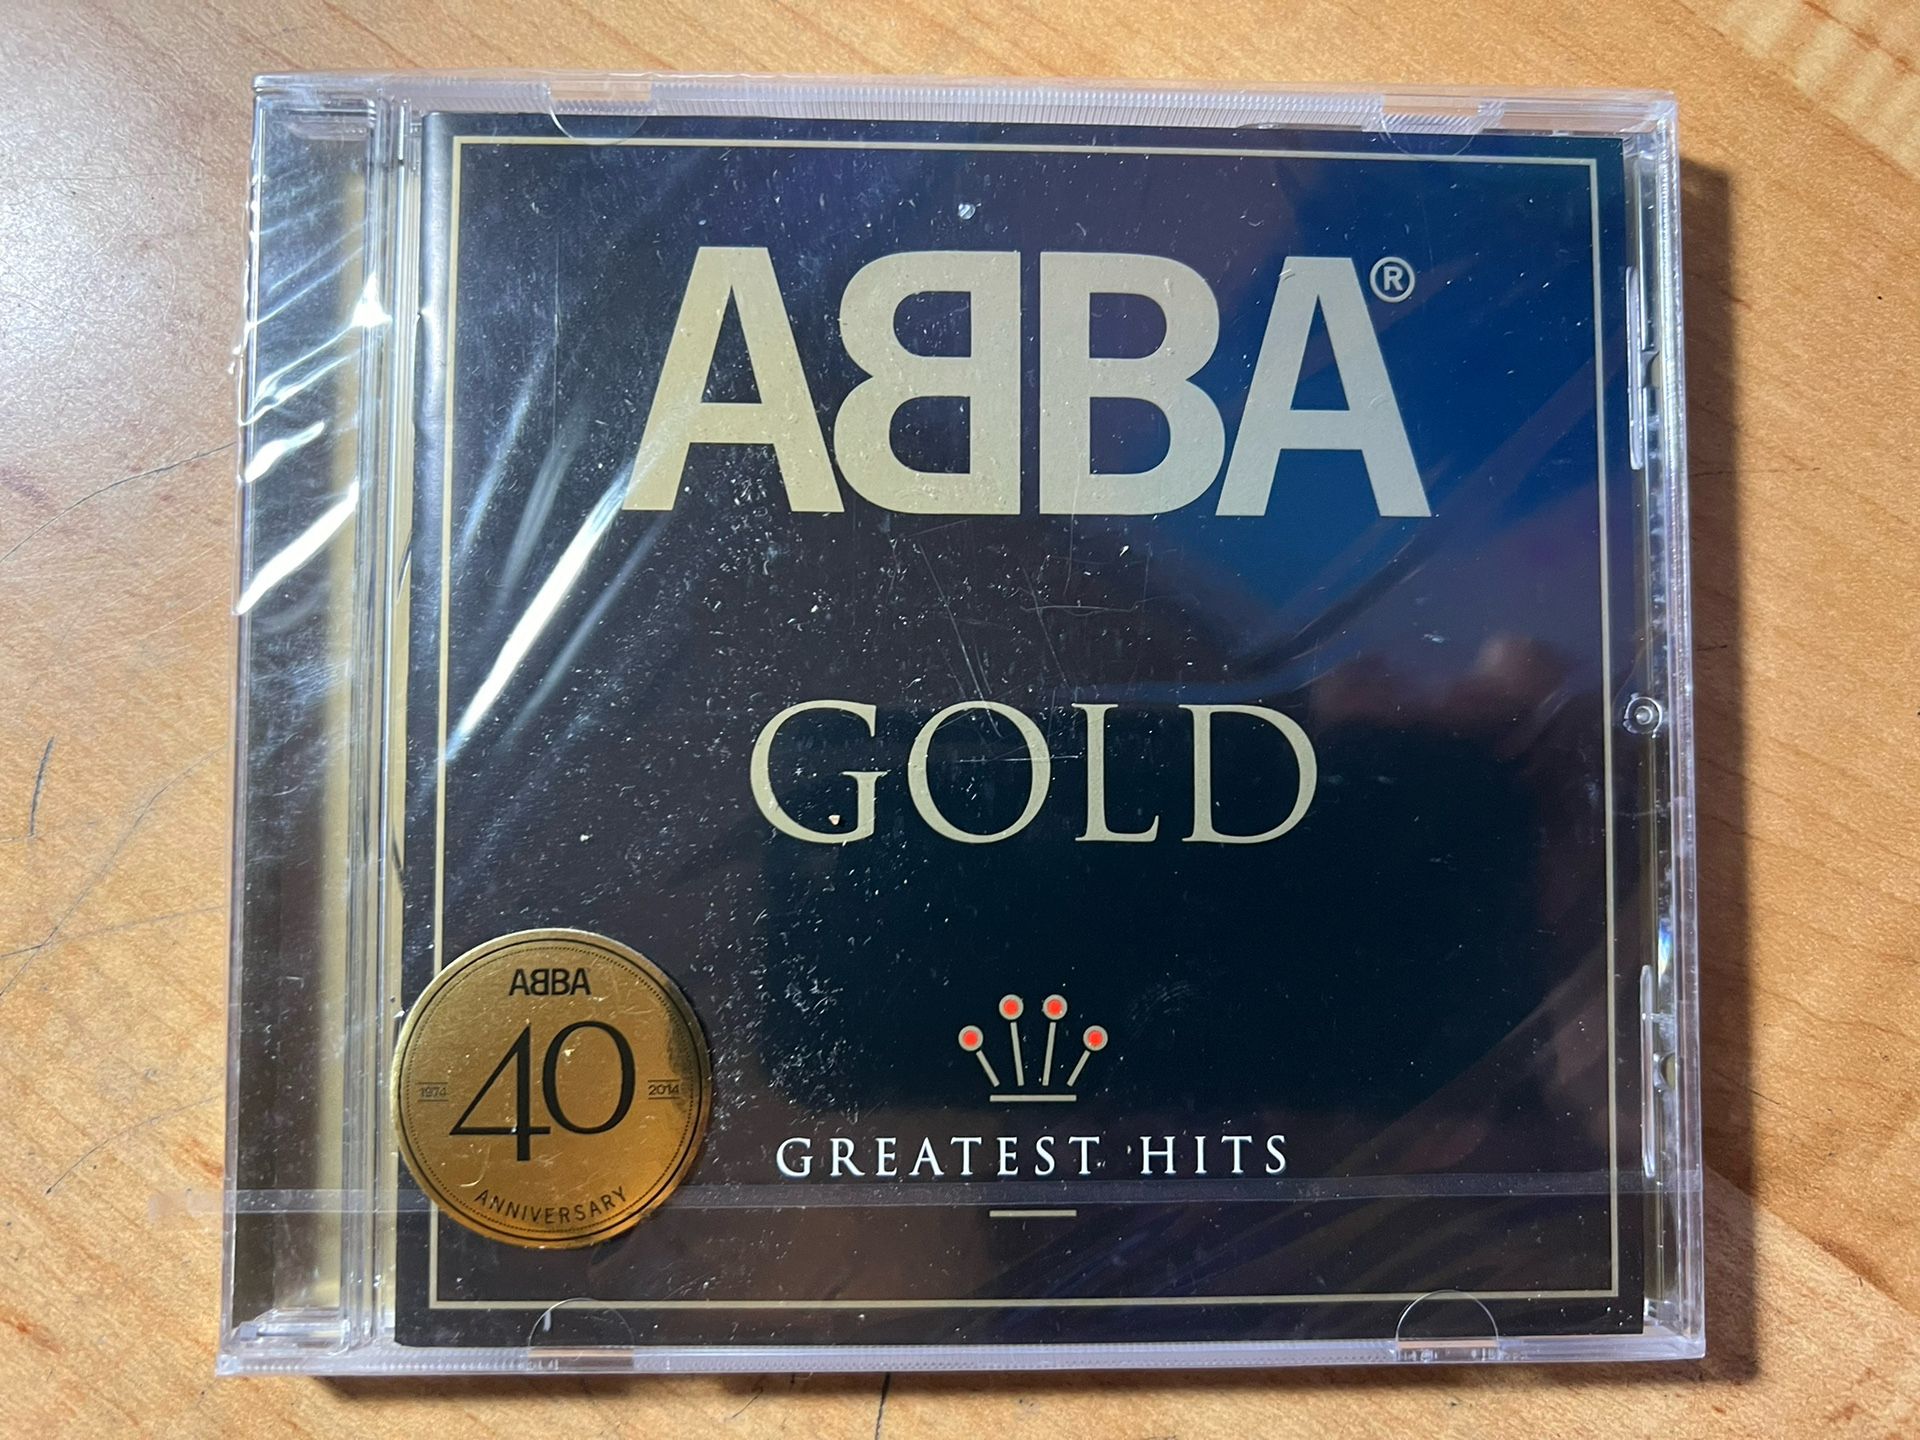 ABBA CD - Gold (40th Anniversary) ** NEW SEALED ** 2008